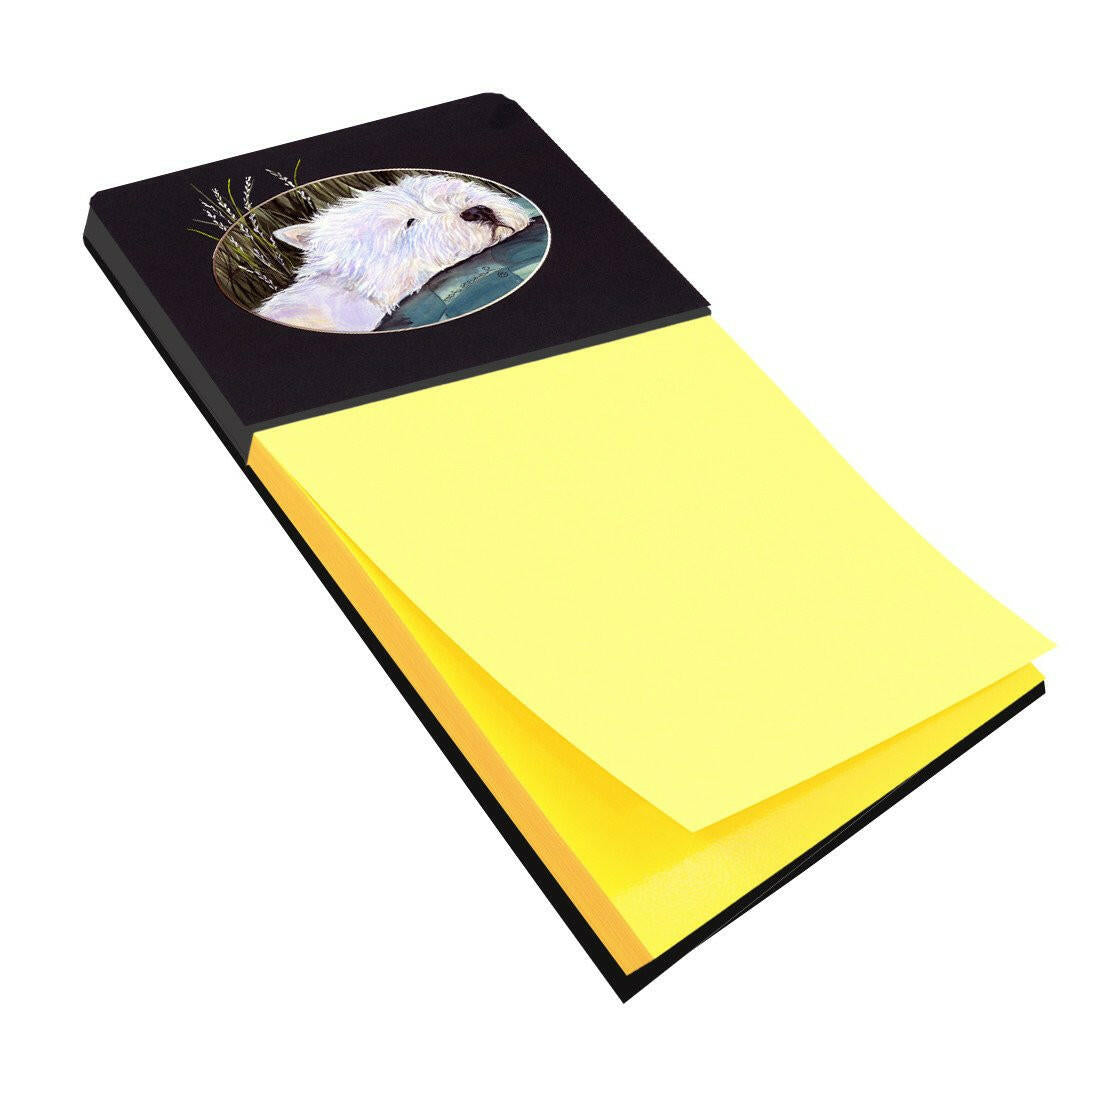 Westie Refiillable Sticky Note Holder or Postit Note Dispenser SS8052SN by Caroline's Treasures